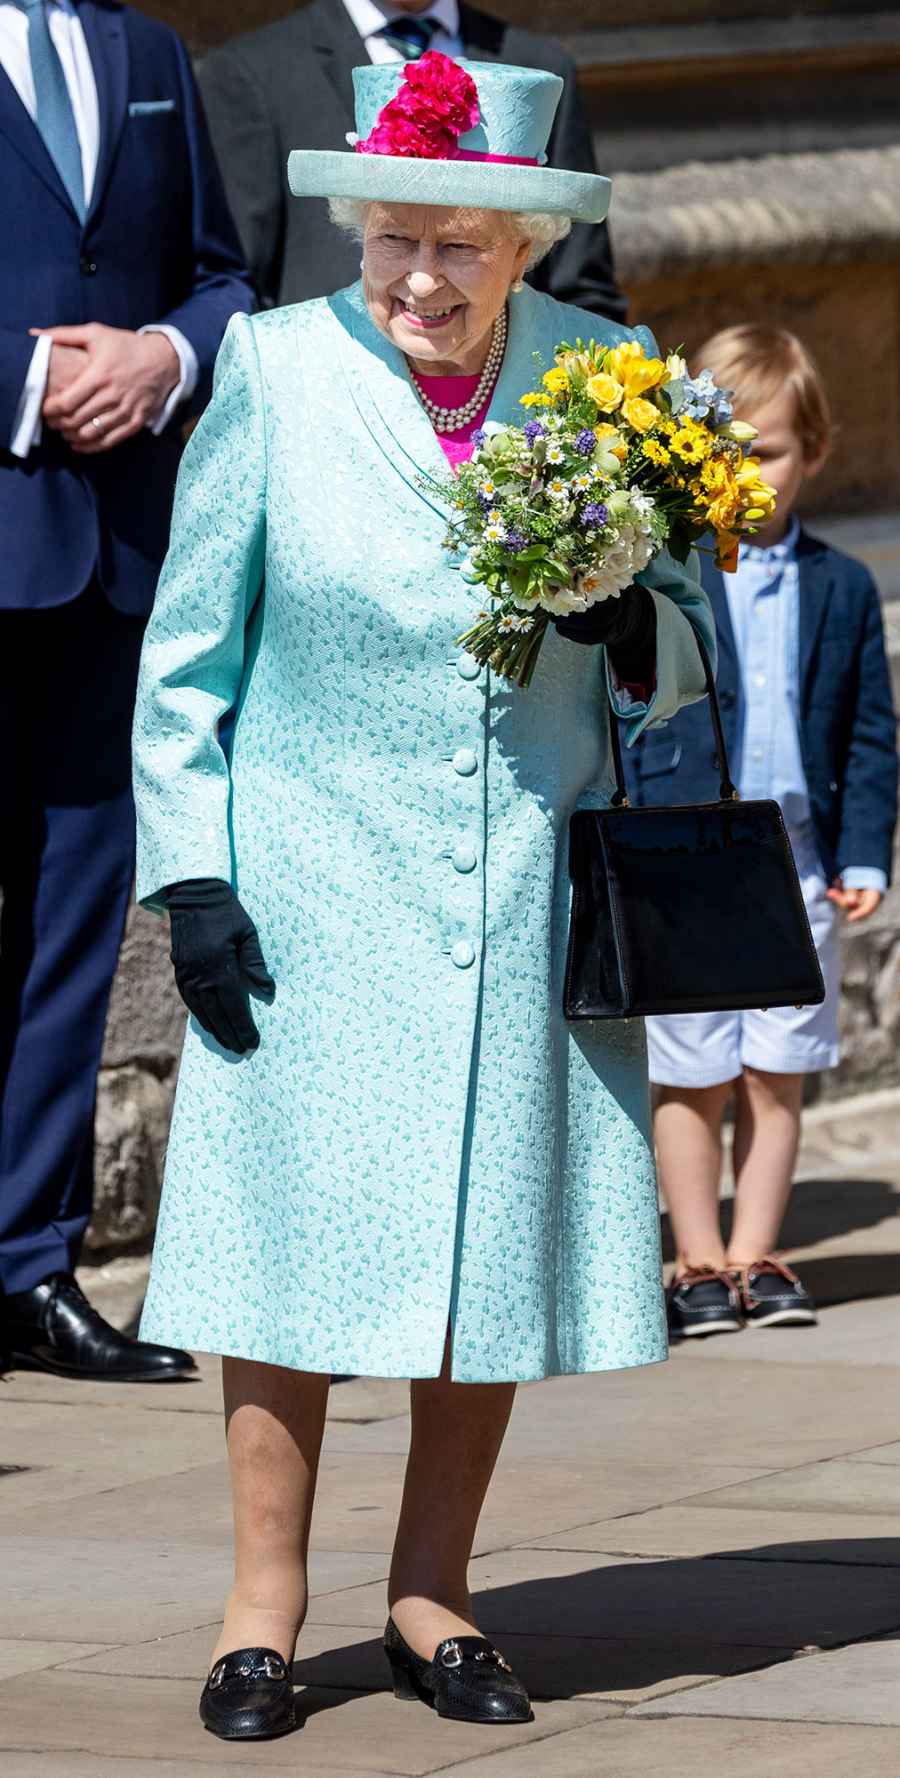 Queen Elizabeth II Easter Sunday Celebrated Her 93rd Birthday in a Fun, Colorful Outfit